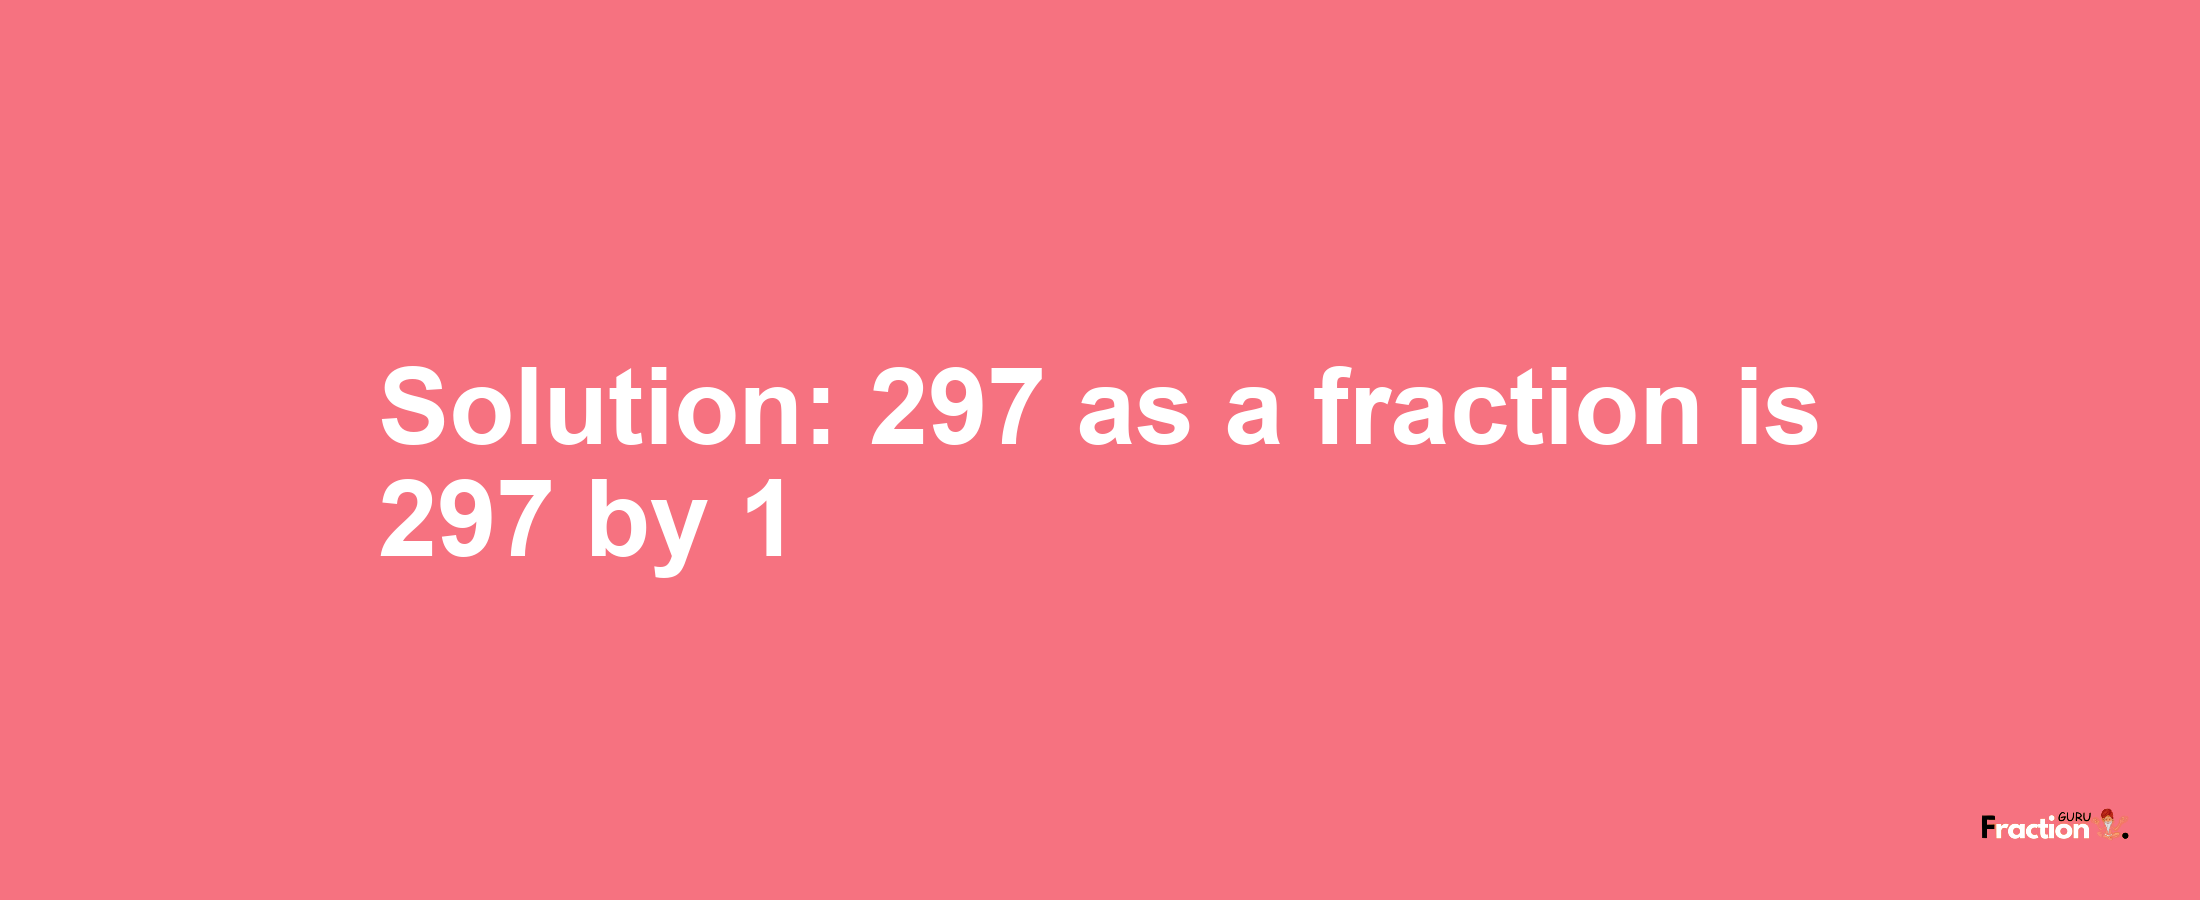 Solution:297 as a fraction is 297/1